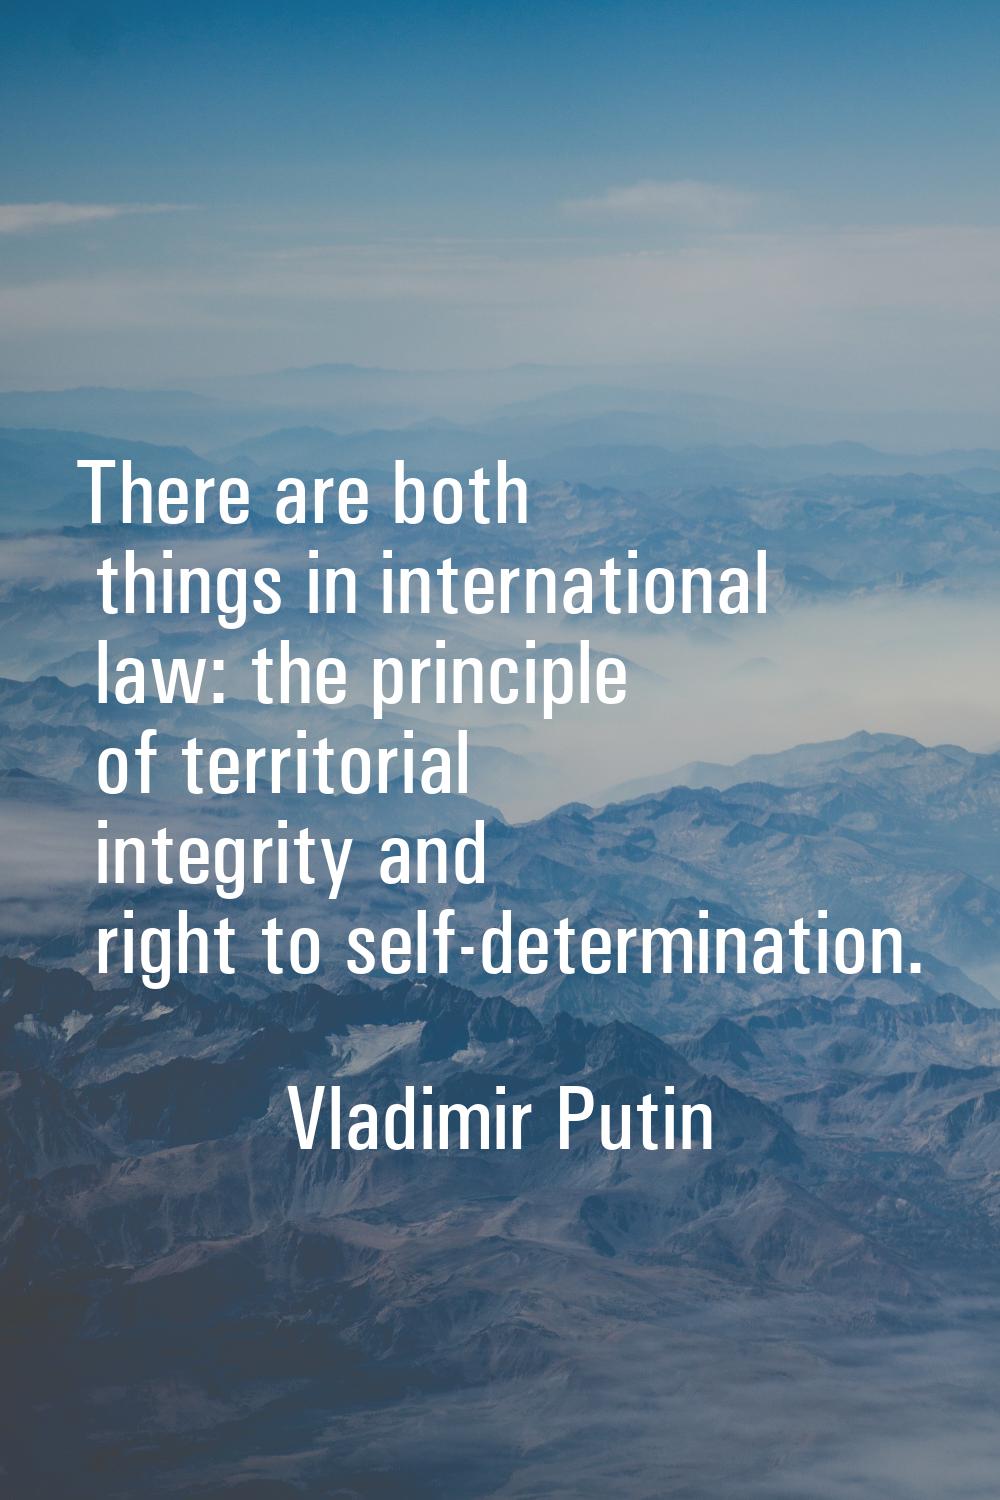 There are both things in international law: the principle of territorial integrity and right to sel